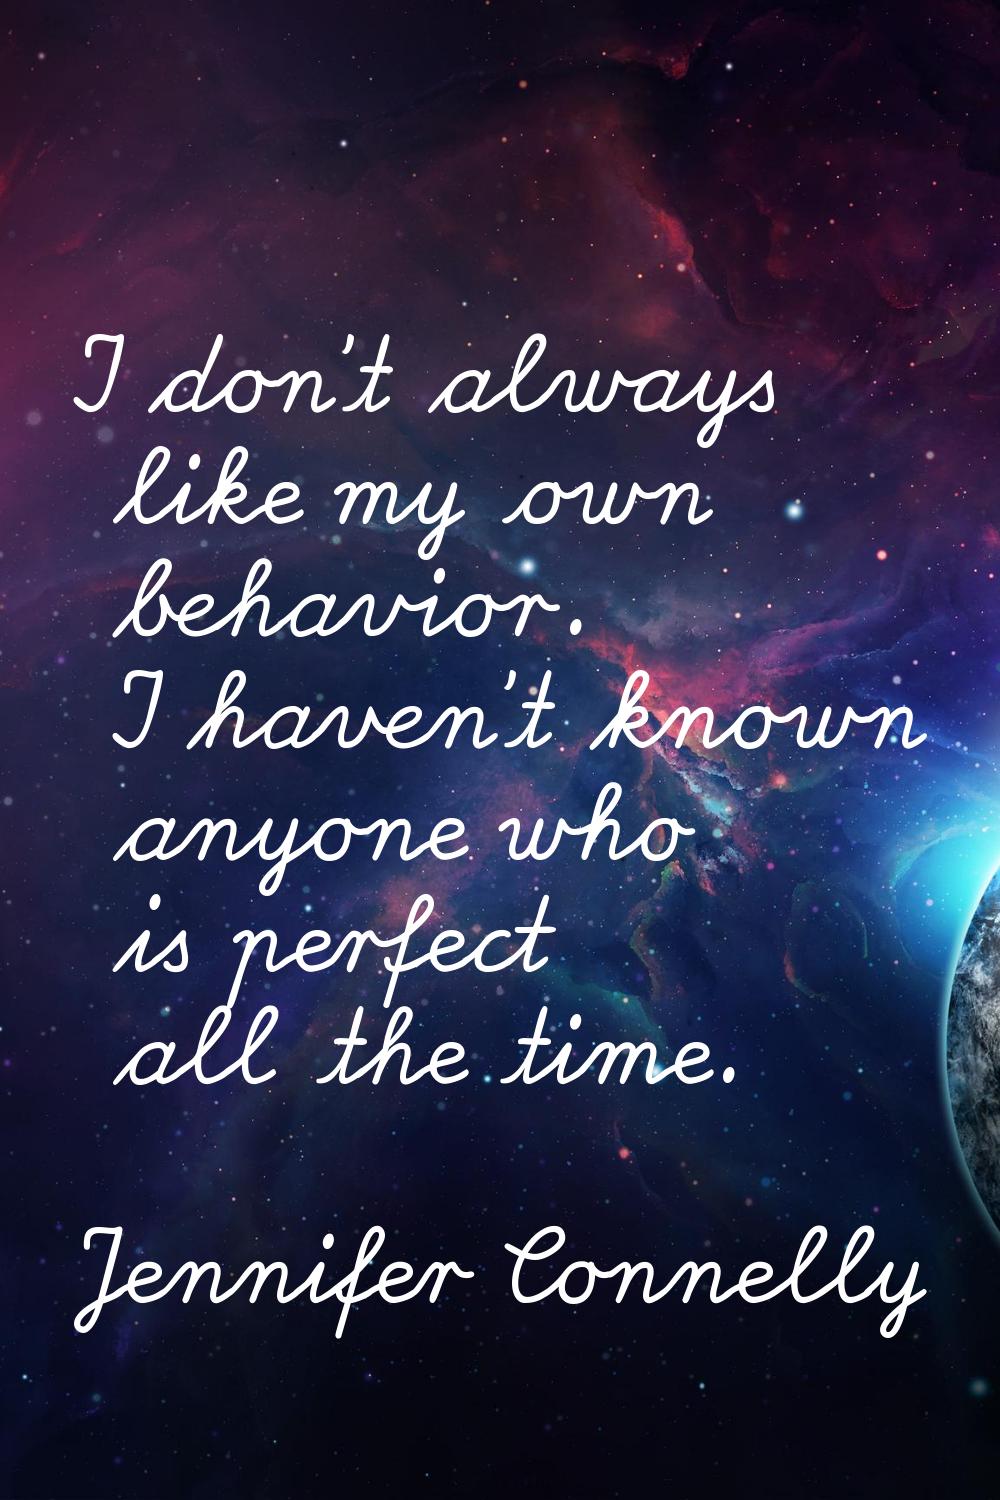 I don't always like my own behavior. I haven't known anyone who is perfect all the time.